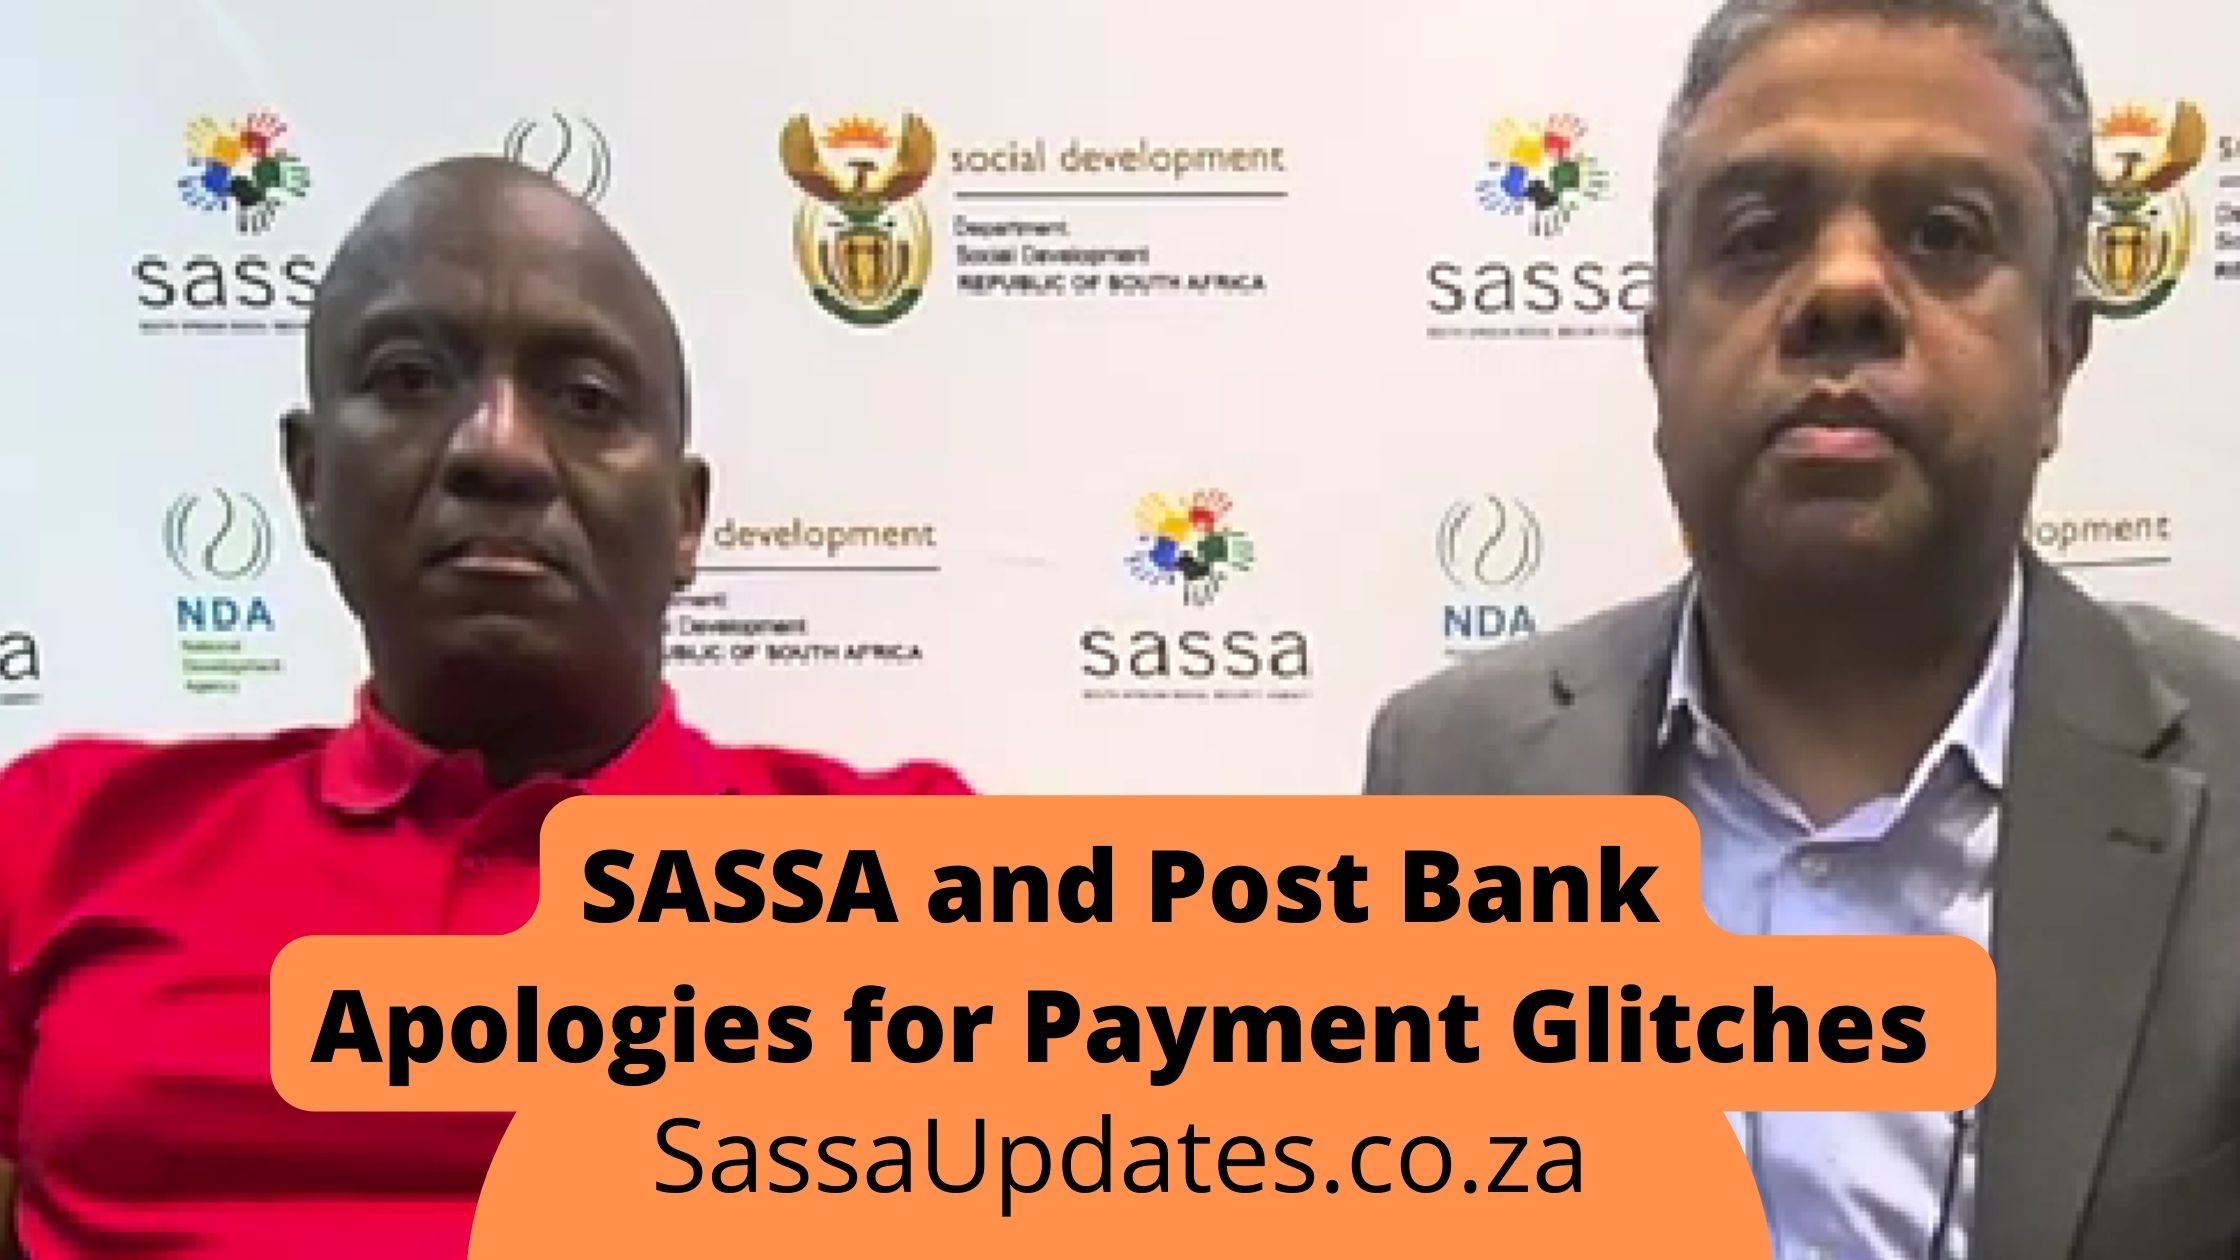 SASSA and Post Bank Apologies for Payment Glitches